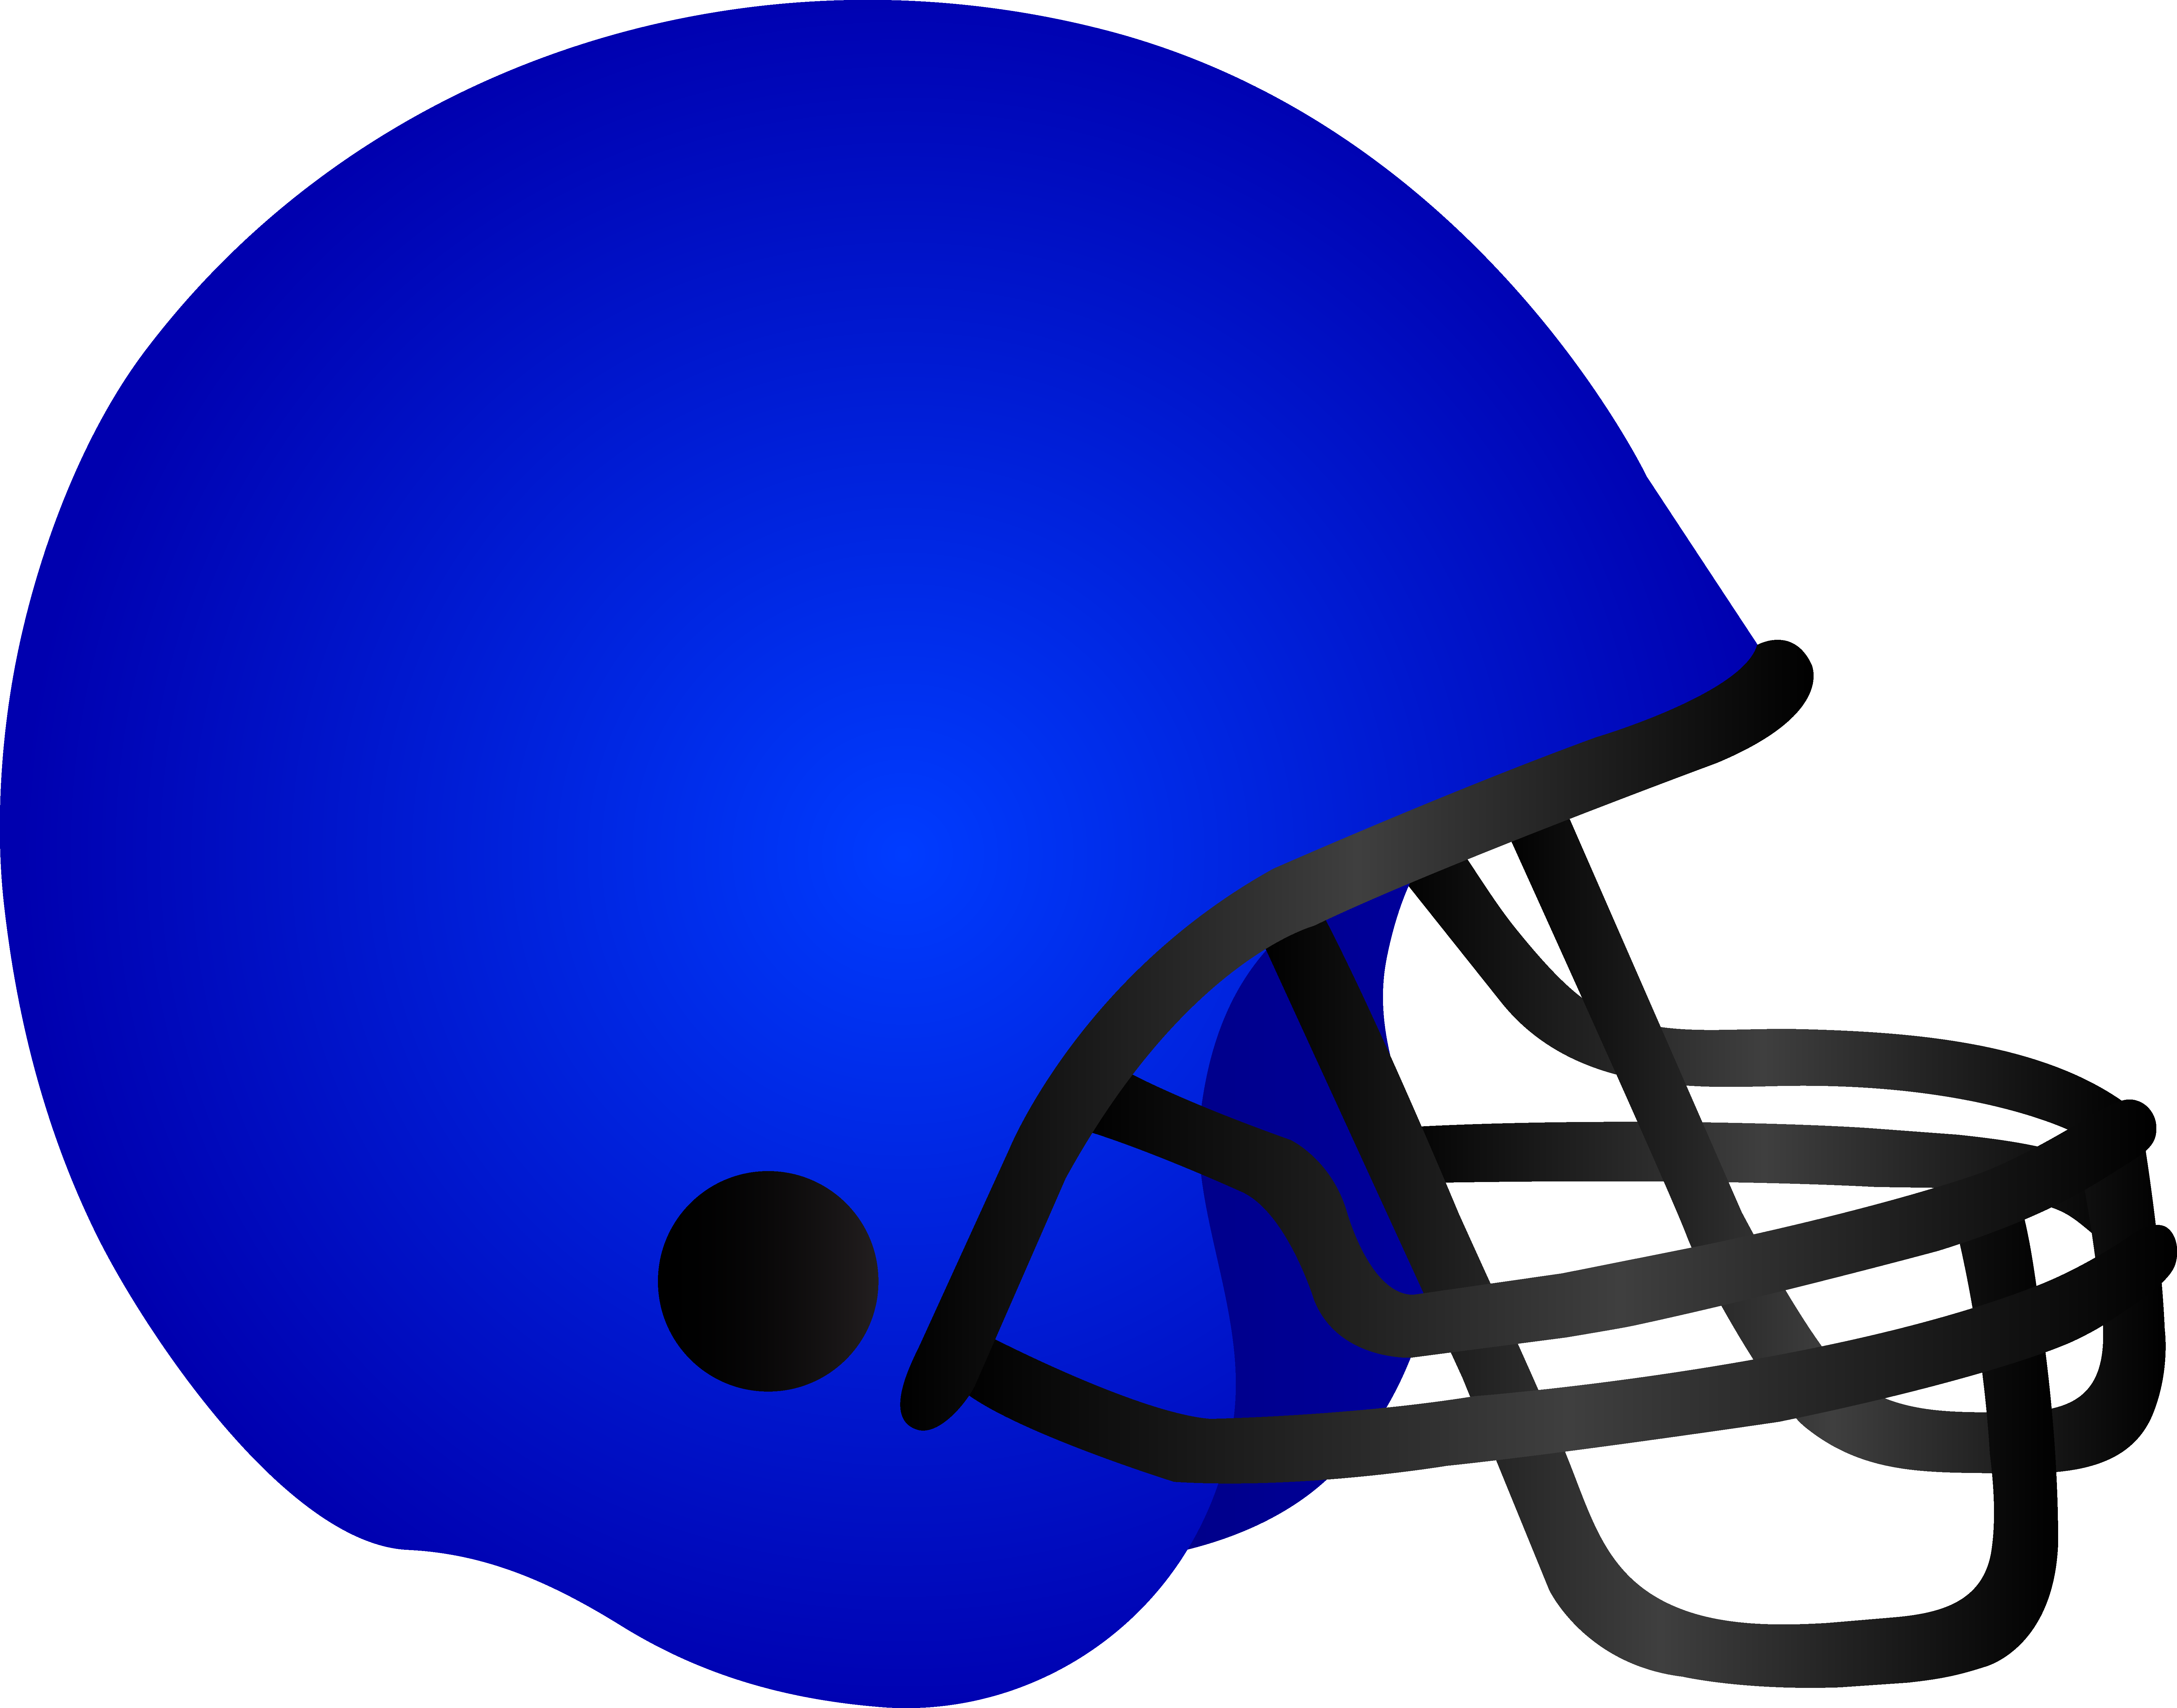 Cartoon Football Helmet Front View Images  Pictures - Becuo